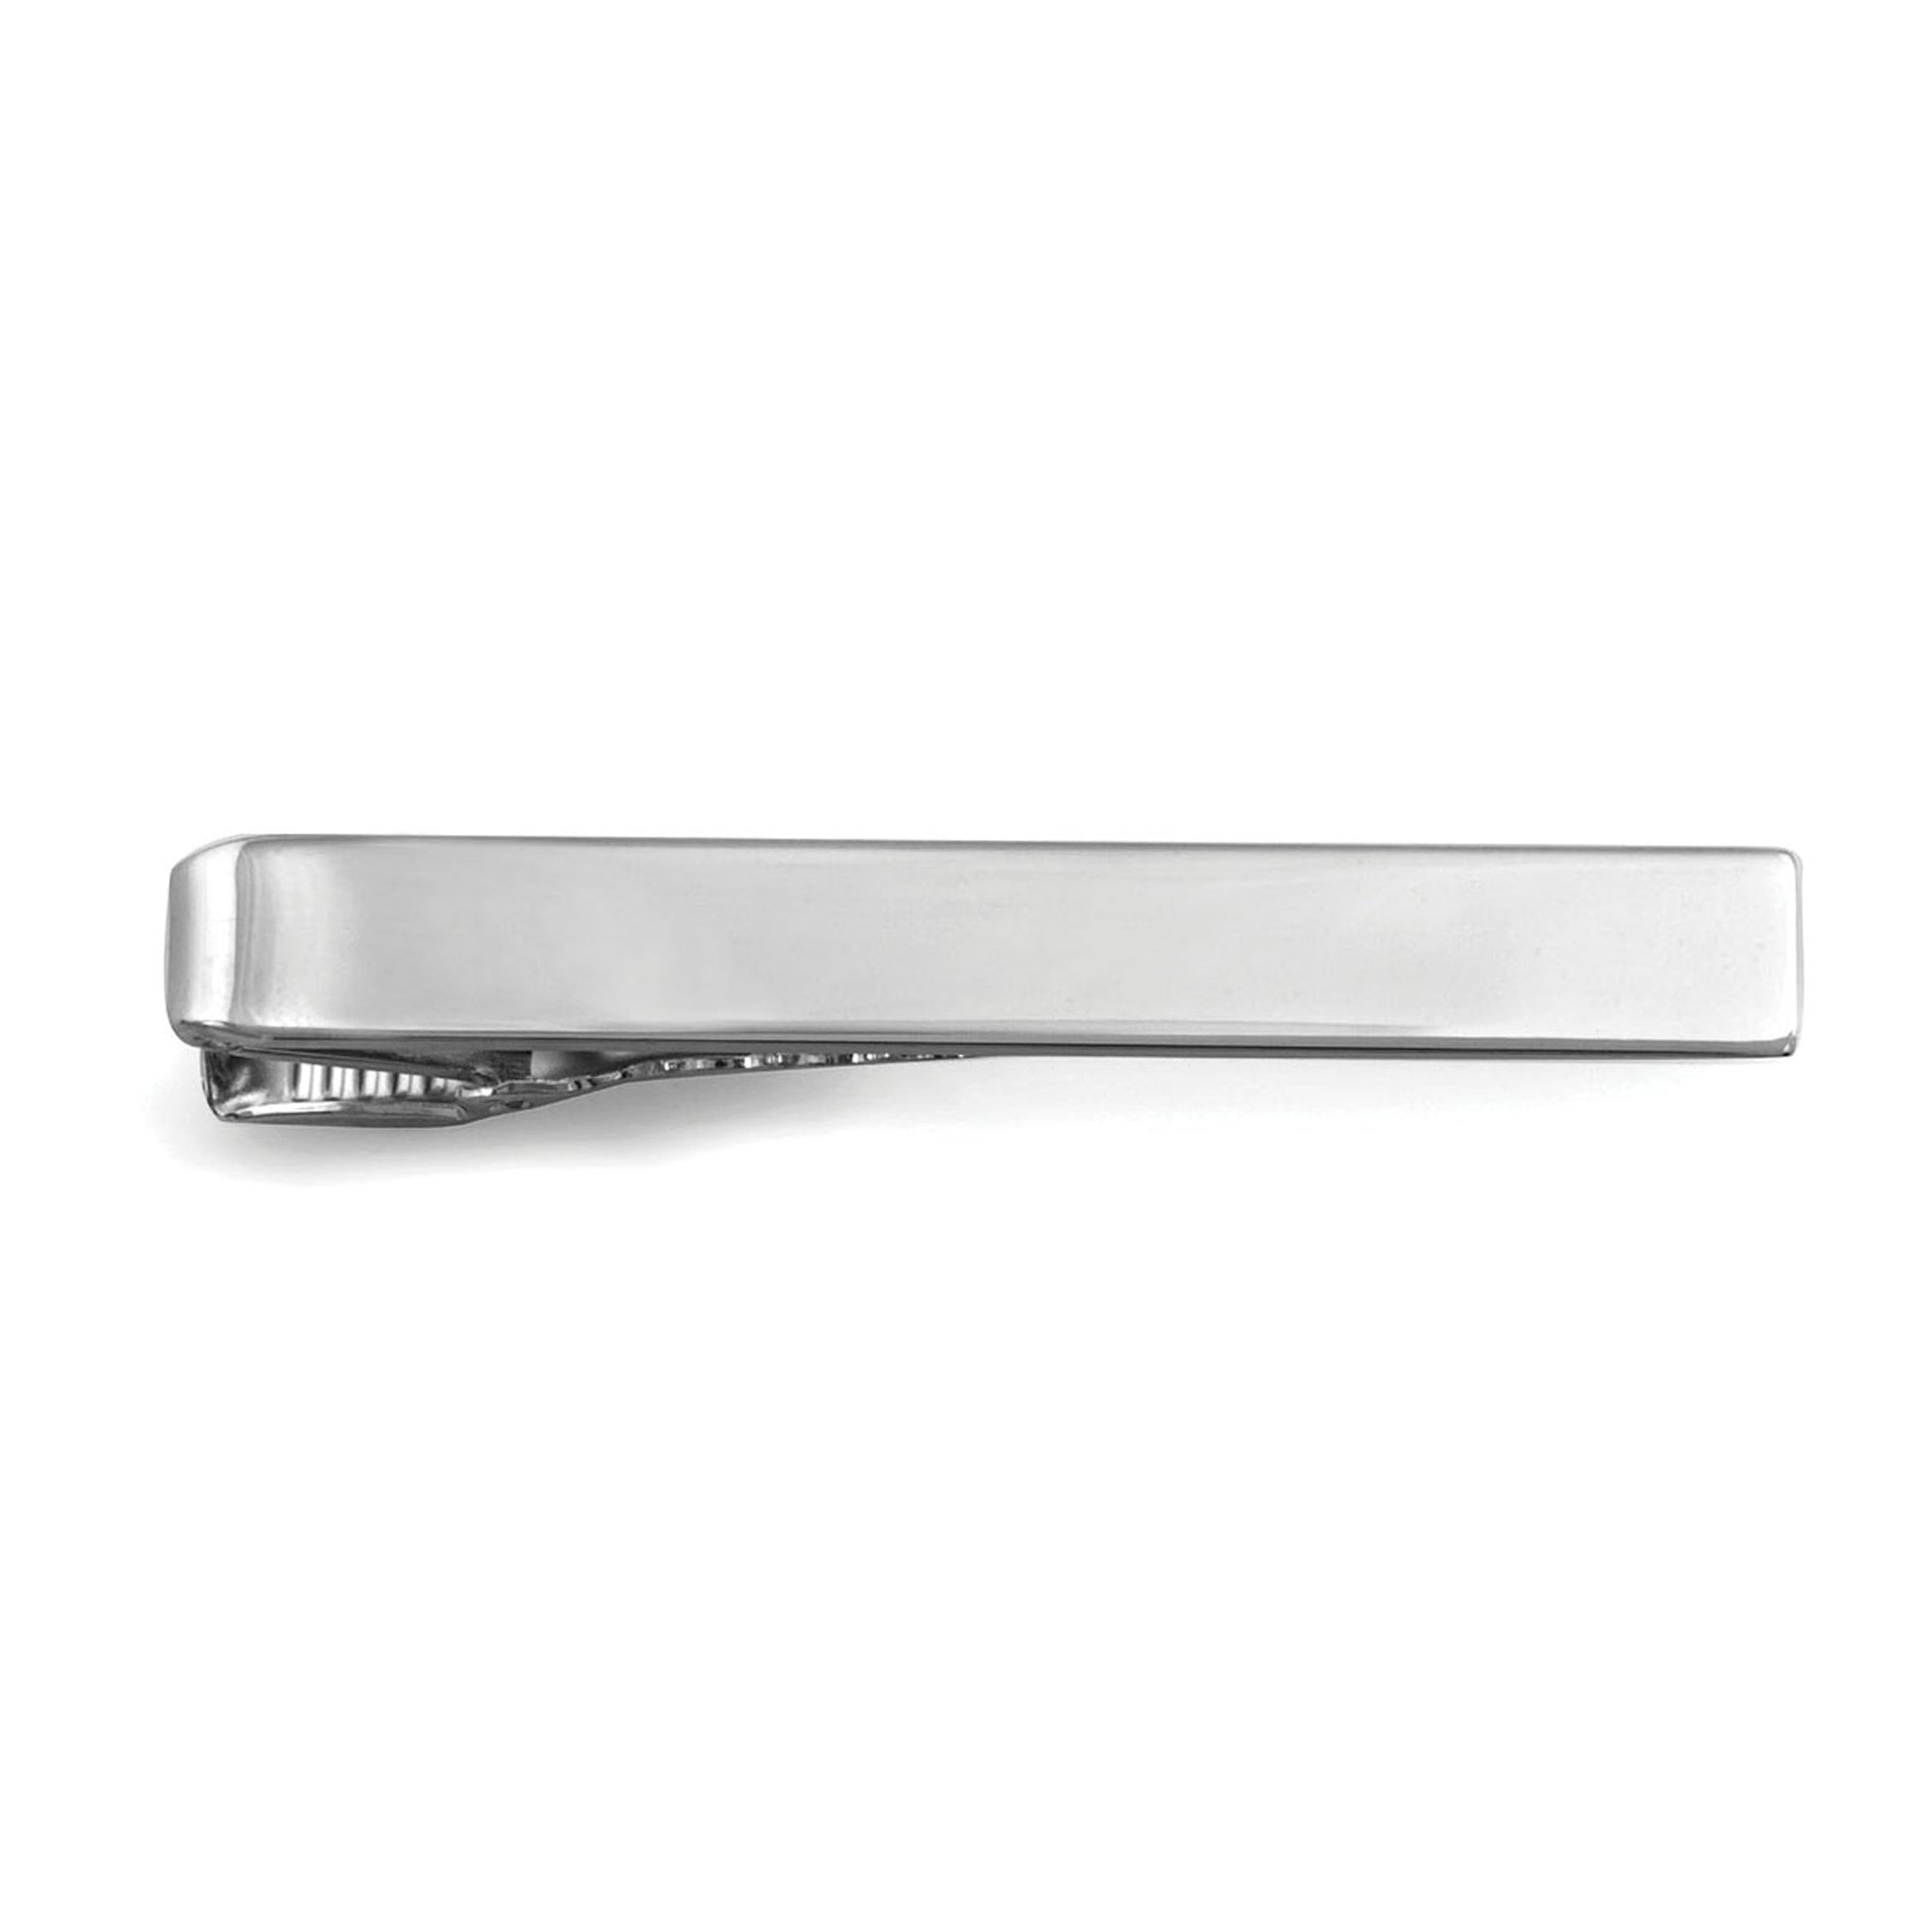 A sterling silver plain polished tie bar displayed on a neutral white background.